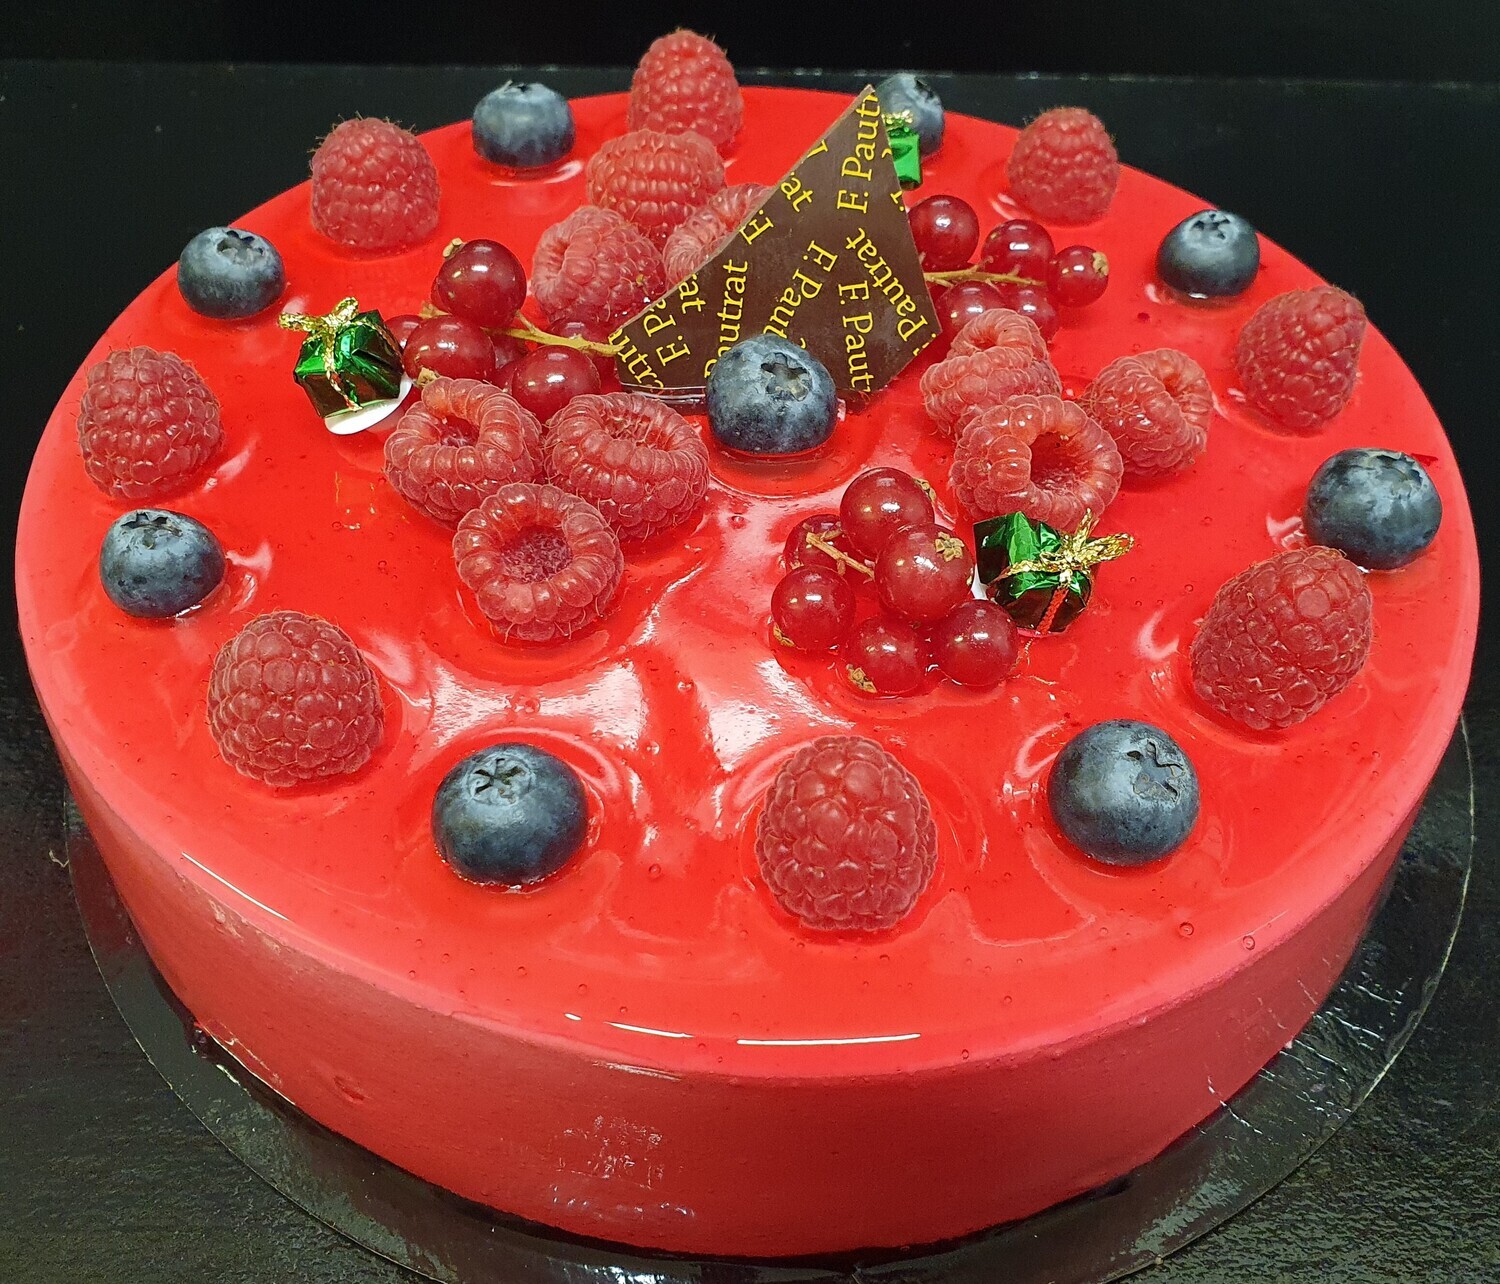 DELICE FRAMBOISE FRUITS ROUGES 6 personnes